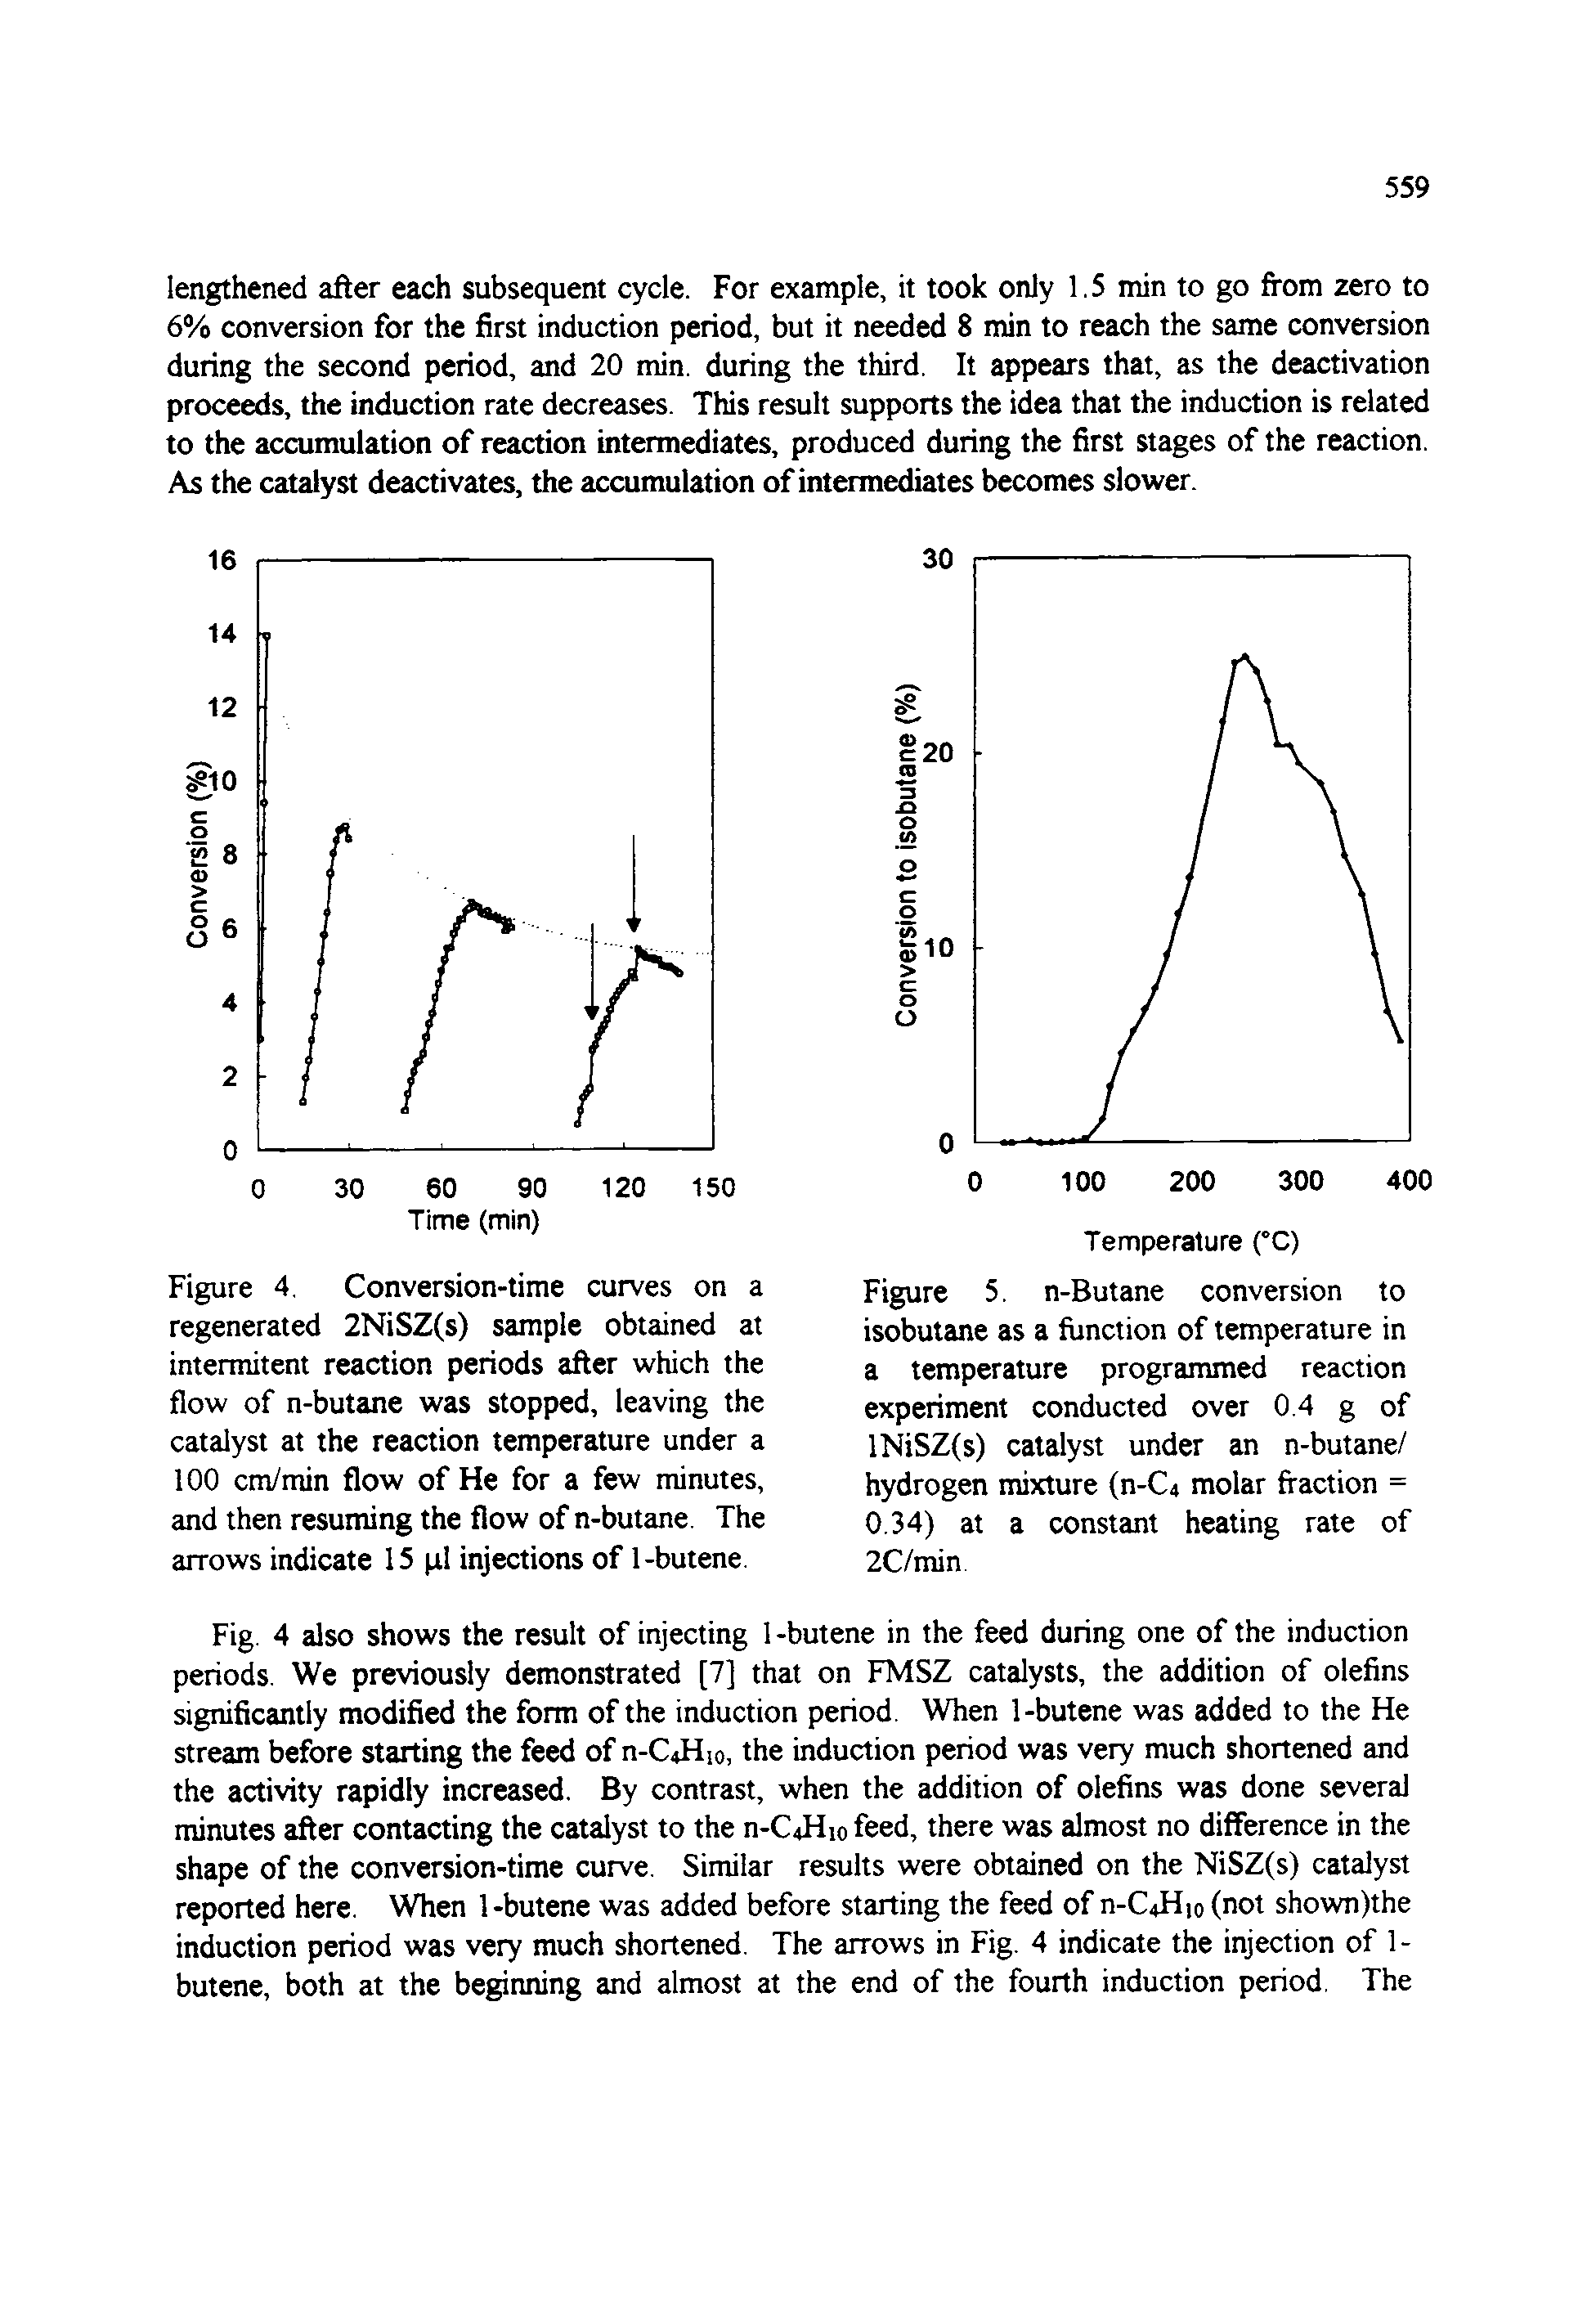 Figure 4. Conversion-time curves on a regenerated 2NiSZ(s) sample obtained at intermitent reaction periods after which the flow of n-butane was stopped, leaving the catalyst at the reaction temperature under a 100 cm/min flow of He for a few minutes, and then resuming the flow of n-butane. The arrows indicate 15 (tl injections of 1-butene.